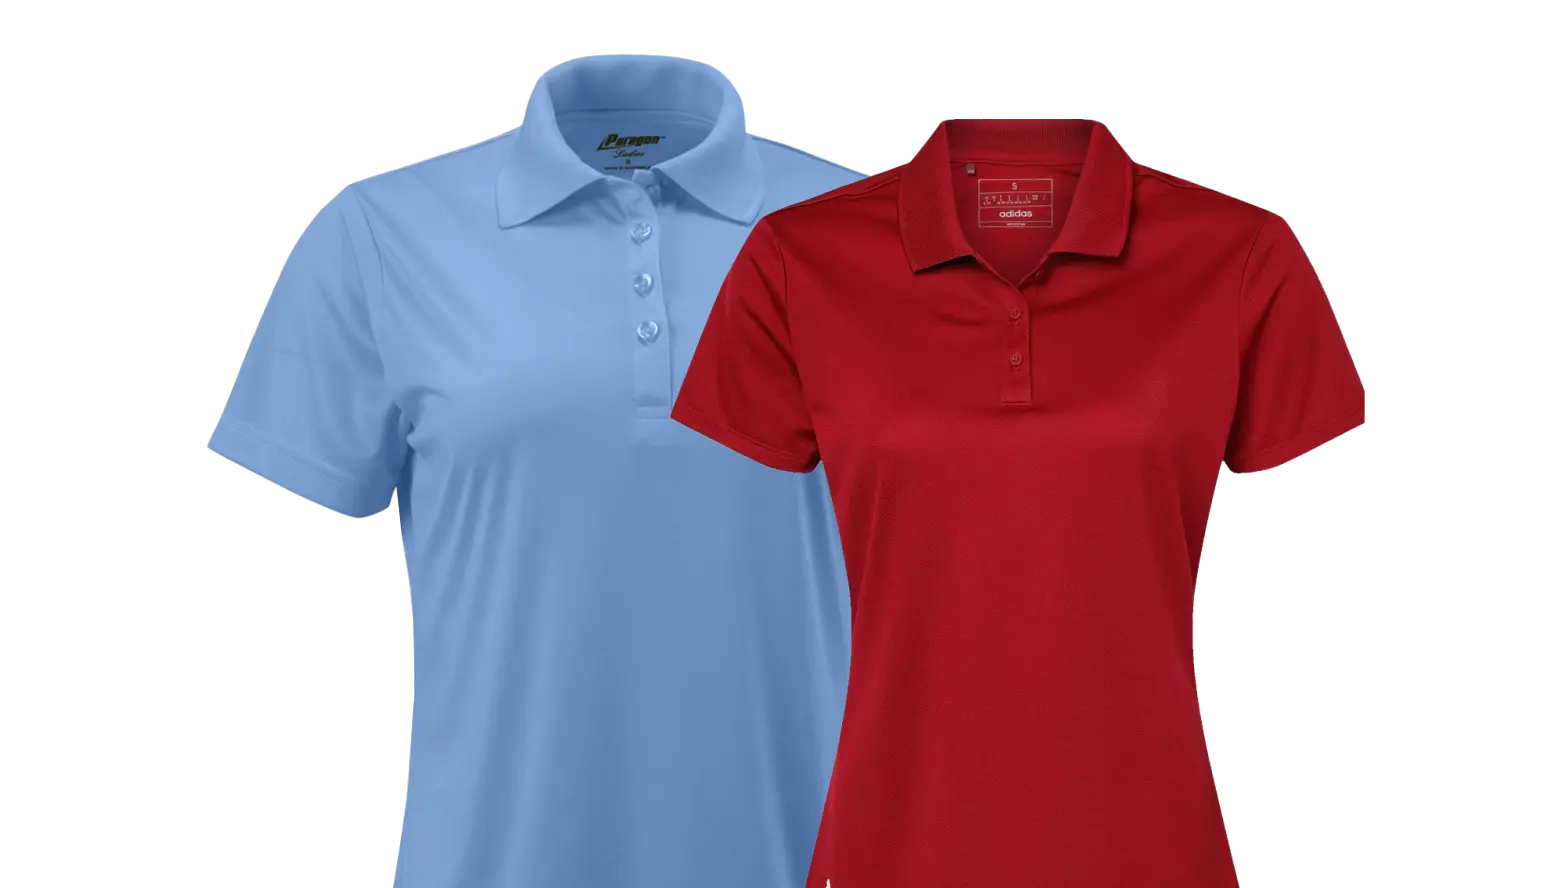 Blue and red polo shirts